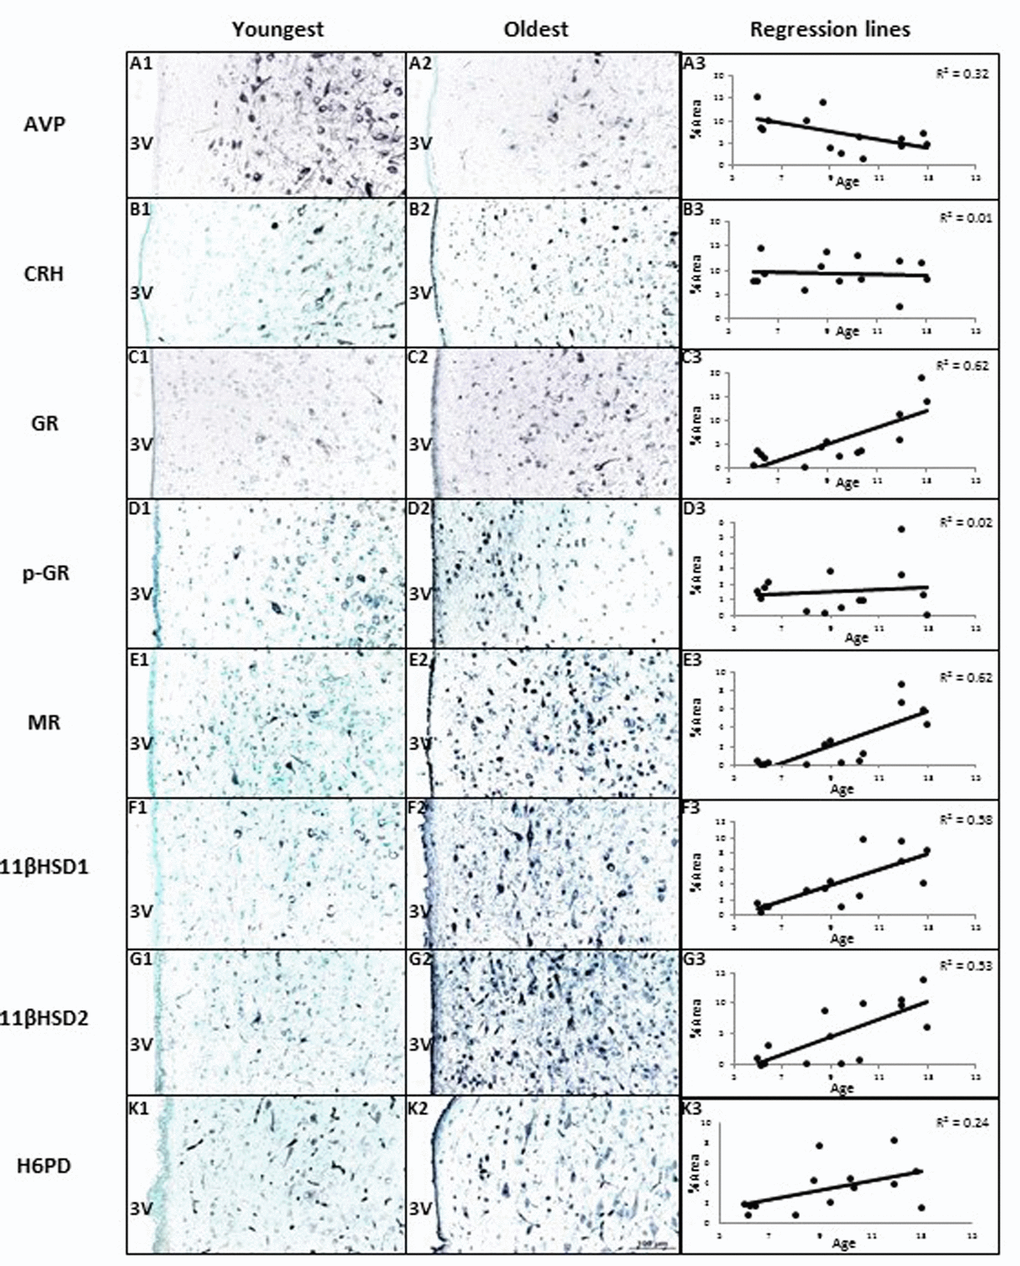 The effects of age on area% positive staining of HPAA proteins in hypothalamus of female baboons (P. hamadryas). Columns A1-K1 and A2-K2 show the youngest and oldest photomicrographs. Column A3-K3 shows correlations between age and peptides of hypothalamus. Linear regression showed AVP expression was negatively correlated with age (R = -0.57, P P P > 0.05). The expression of H6PD tended to correlate positively with age in the PVN of hypothalamus (R = 0.49, P = 0.08). Scale bar (100µm) applies to all micrographs.